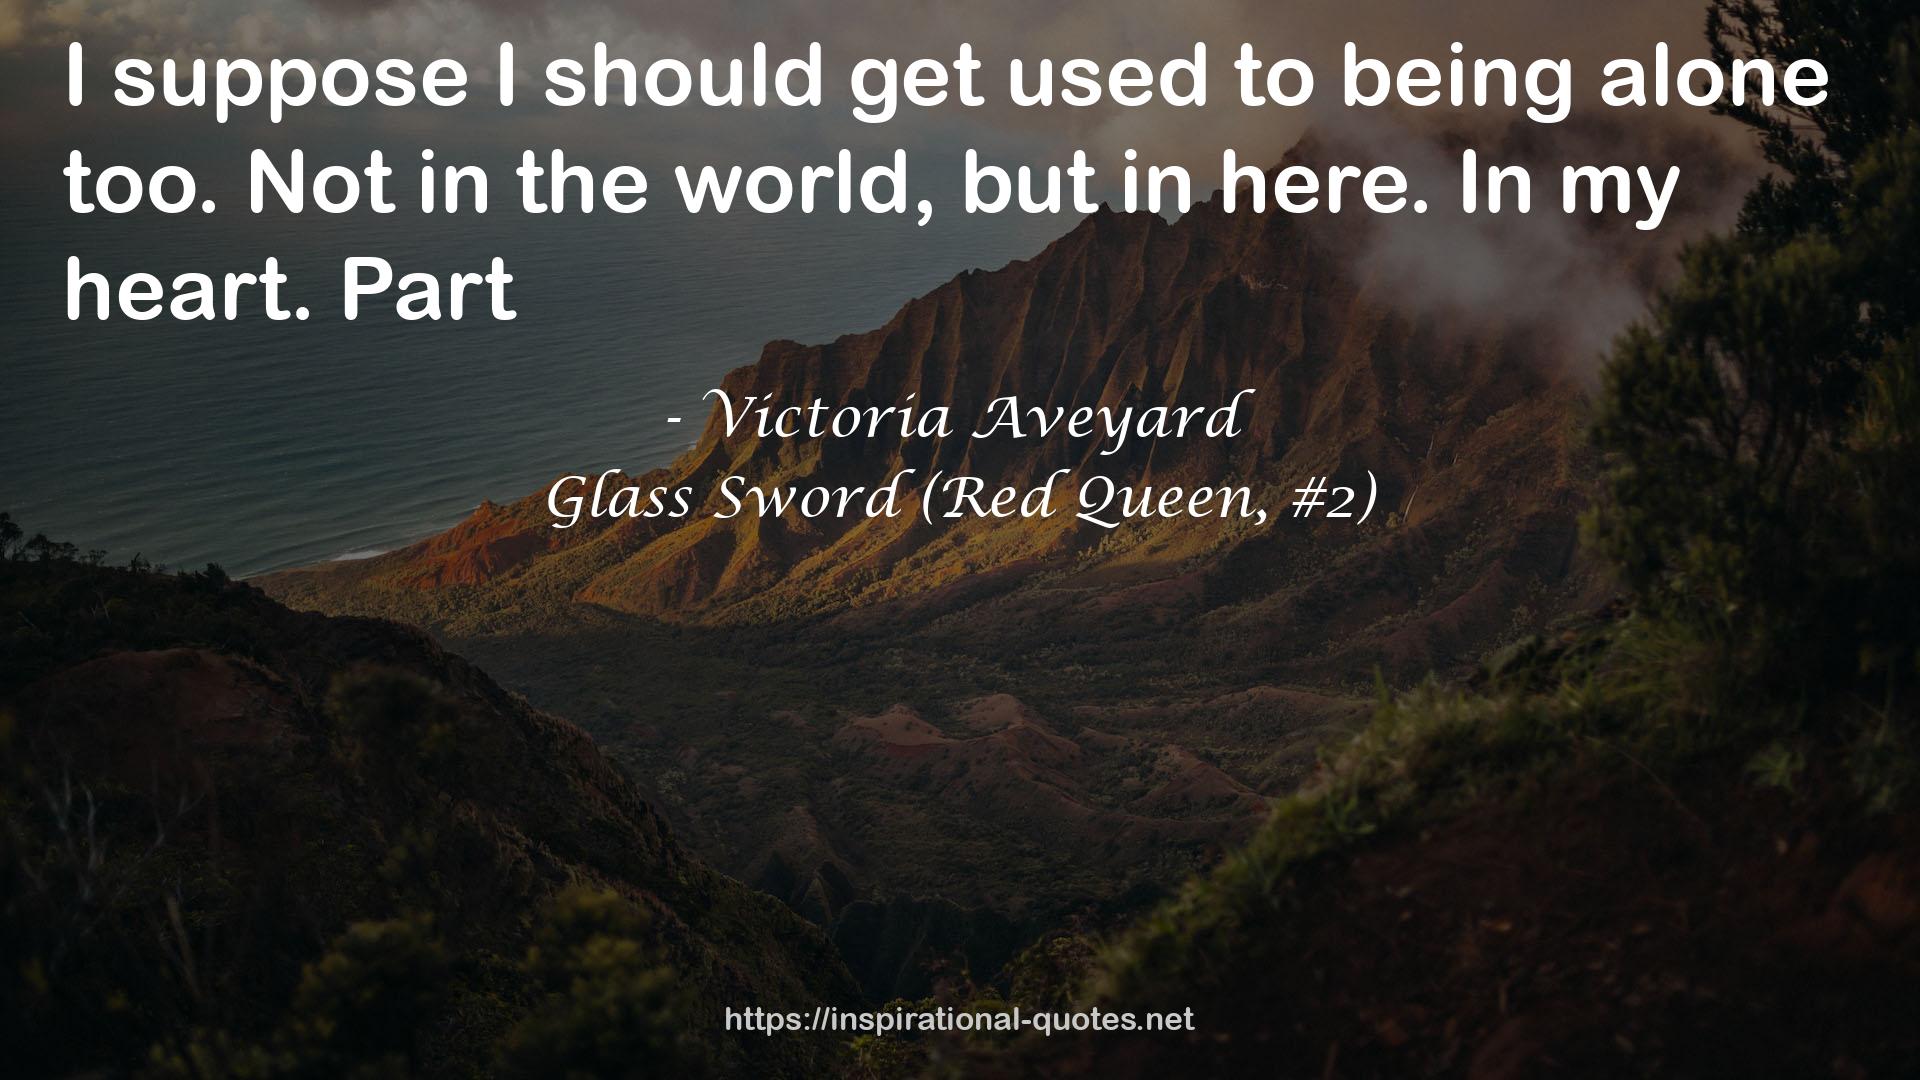 Glass Sword (Red Queen, #2) QUOTES